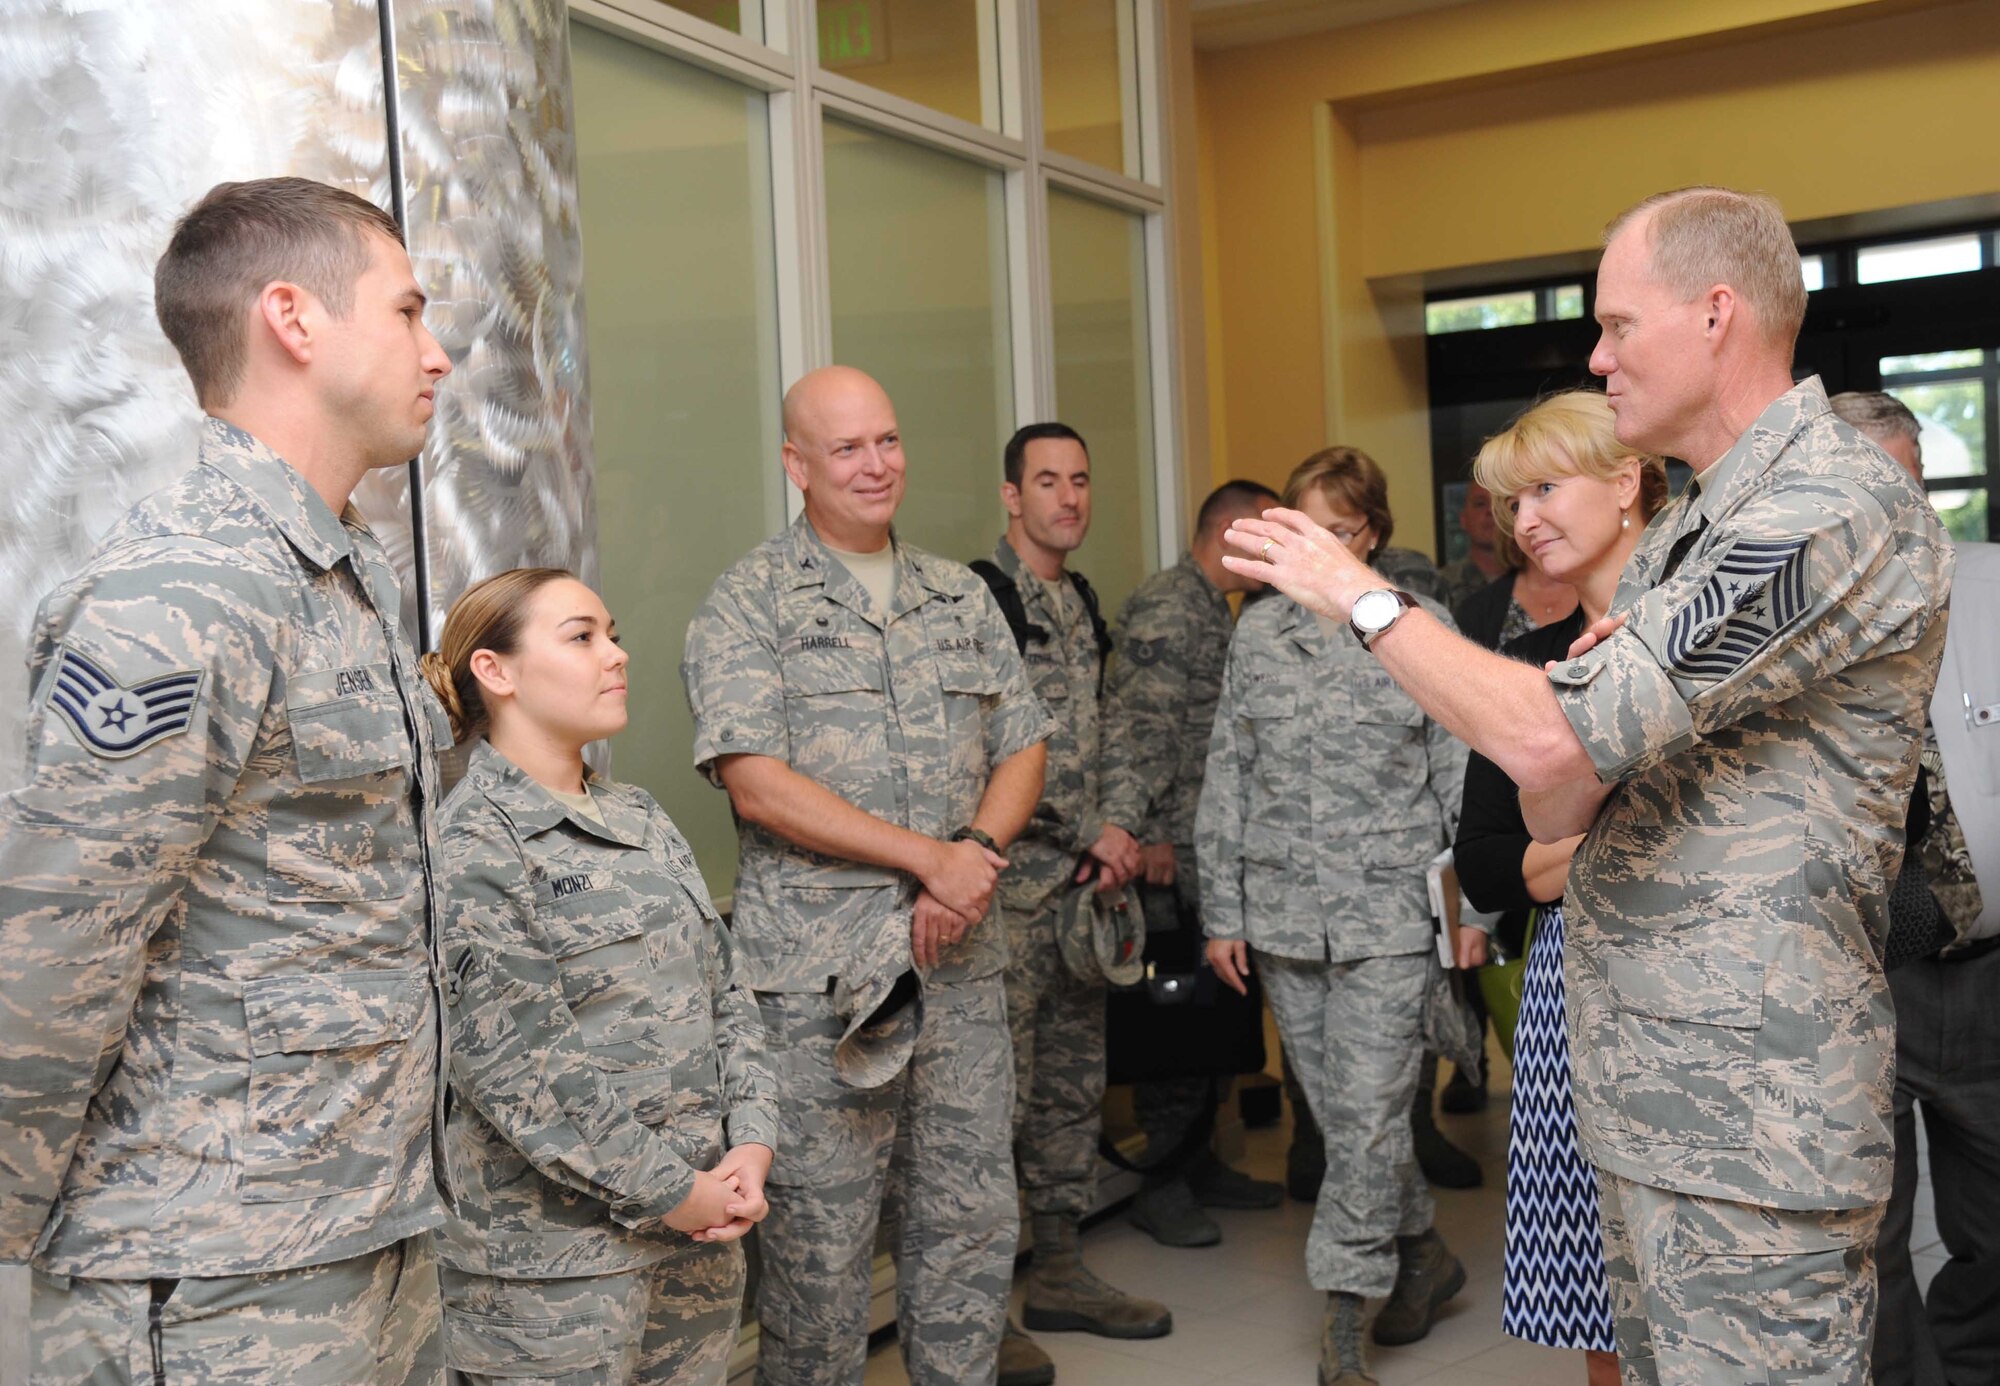 Chief Master Sgt. of the Air Force James A. Cody, right, and his wife, retired Chief Master Sgt. Athena Cody, ask questions of Staff Sgt. Stephen Jensen, Airman 1st Class Mariah Monzi, 81st Medical Operations Squadron, and Col. Thomas Harrell, 81st Medical Group commander, as they tour the Keesler Medical Center emergency department during a two-day visit of Keesler Air Force Base, Miss., Sept. 22-23, 2014. The purpose of the visit was to thank Team Keesler and further understand the various missions here, including 2nd Air Force, 81st Training Wing and the 403rd Wing. (U.S. Air Force photo by Kemberly Groue)